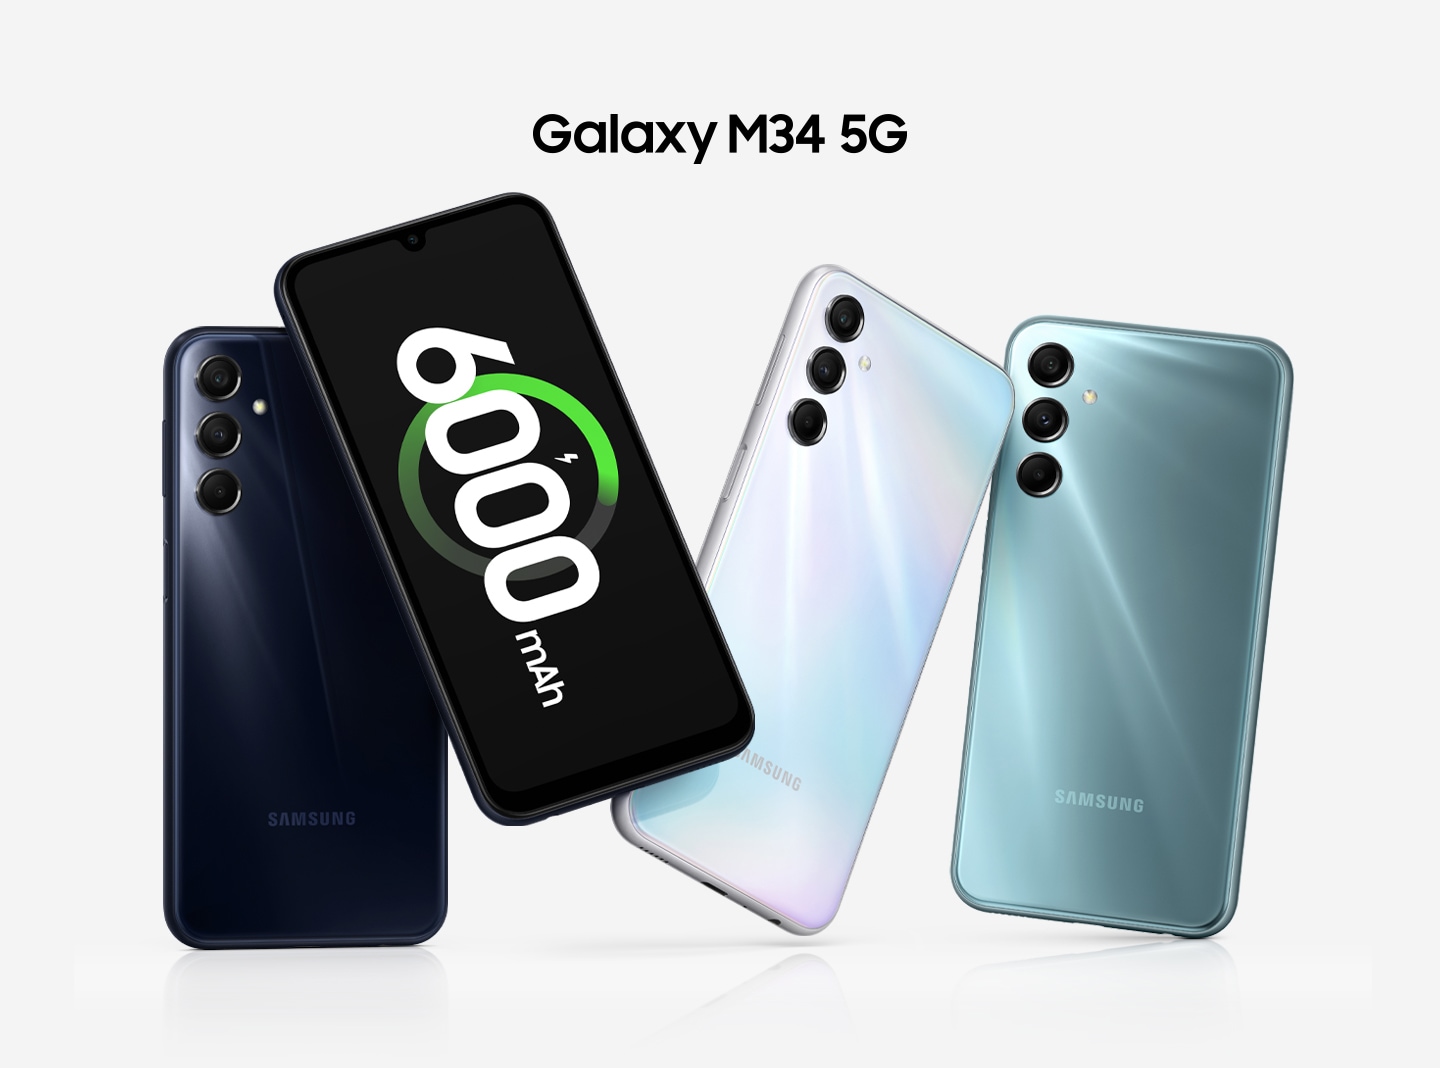 Four Galaxy M34 5G are shown together. At the very left, a Dark Blue Galaxy M34 5G’s back cover is shown. To its right, a frontal view is shown with the battery charging icon and the '6000mAh' shown on-screen. Then, the back covers of the Silver and Blue devices are shown.